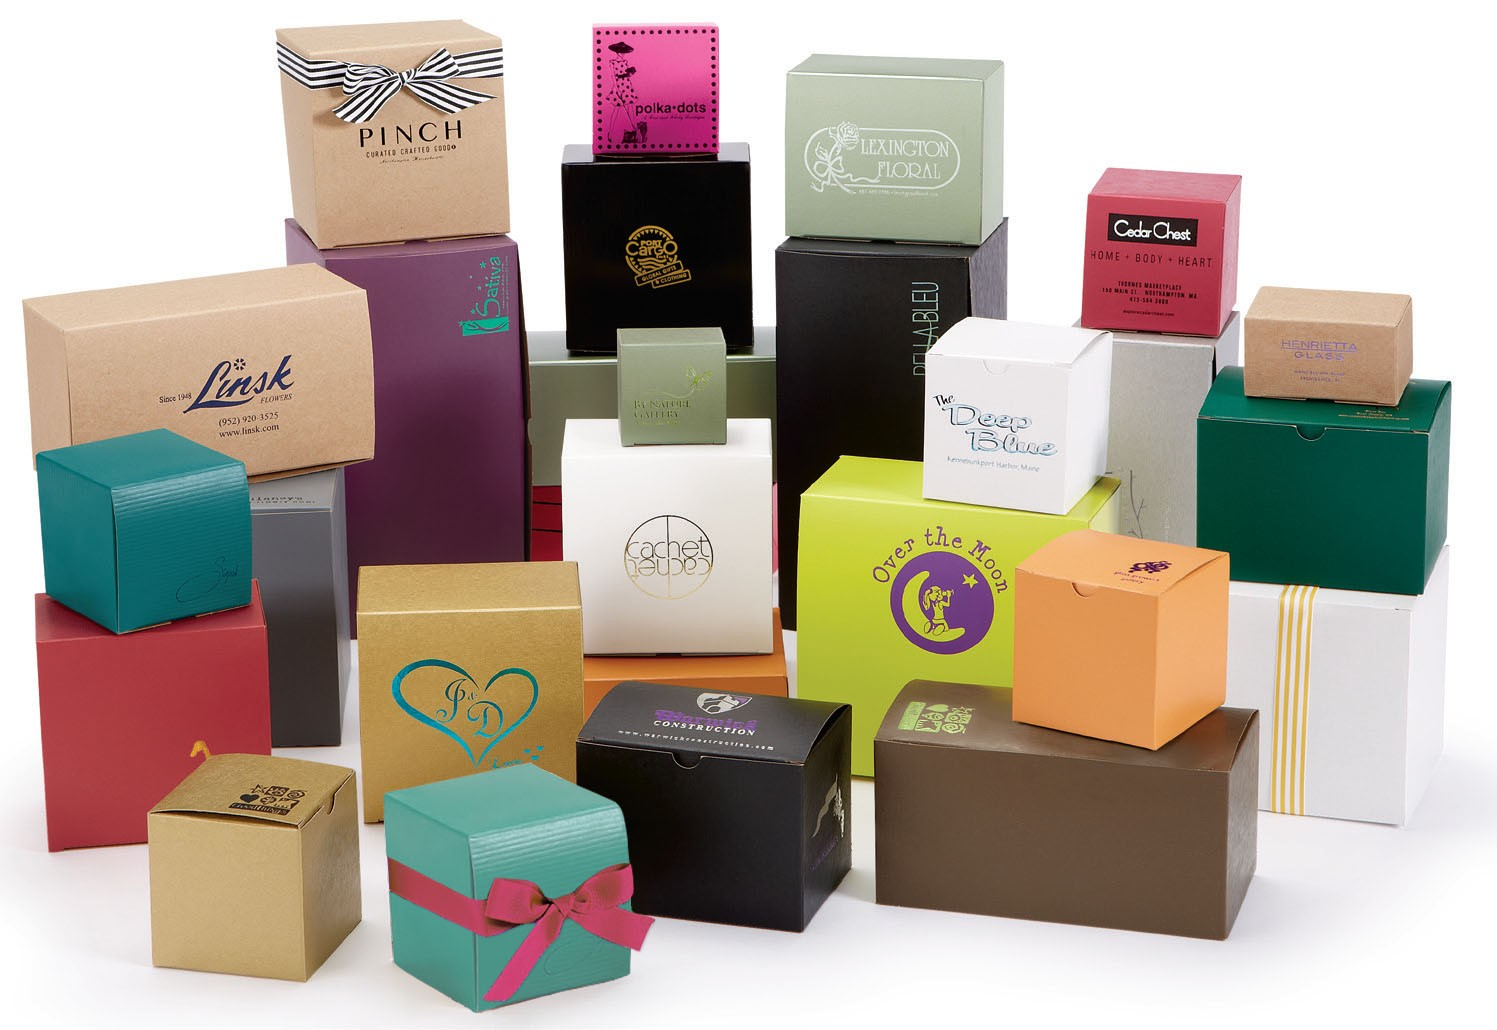 Top Five Benefits of Using Retail Boxes for Your Products